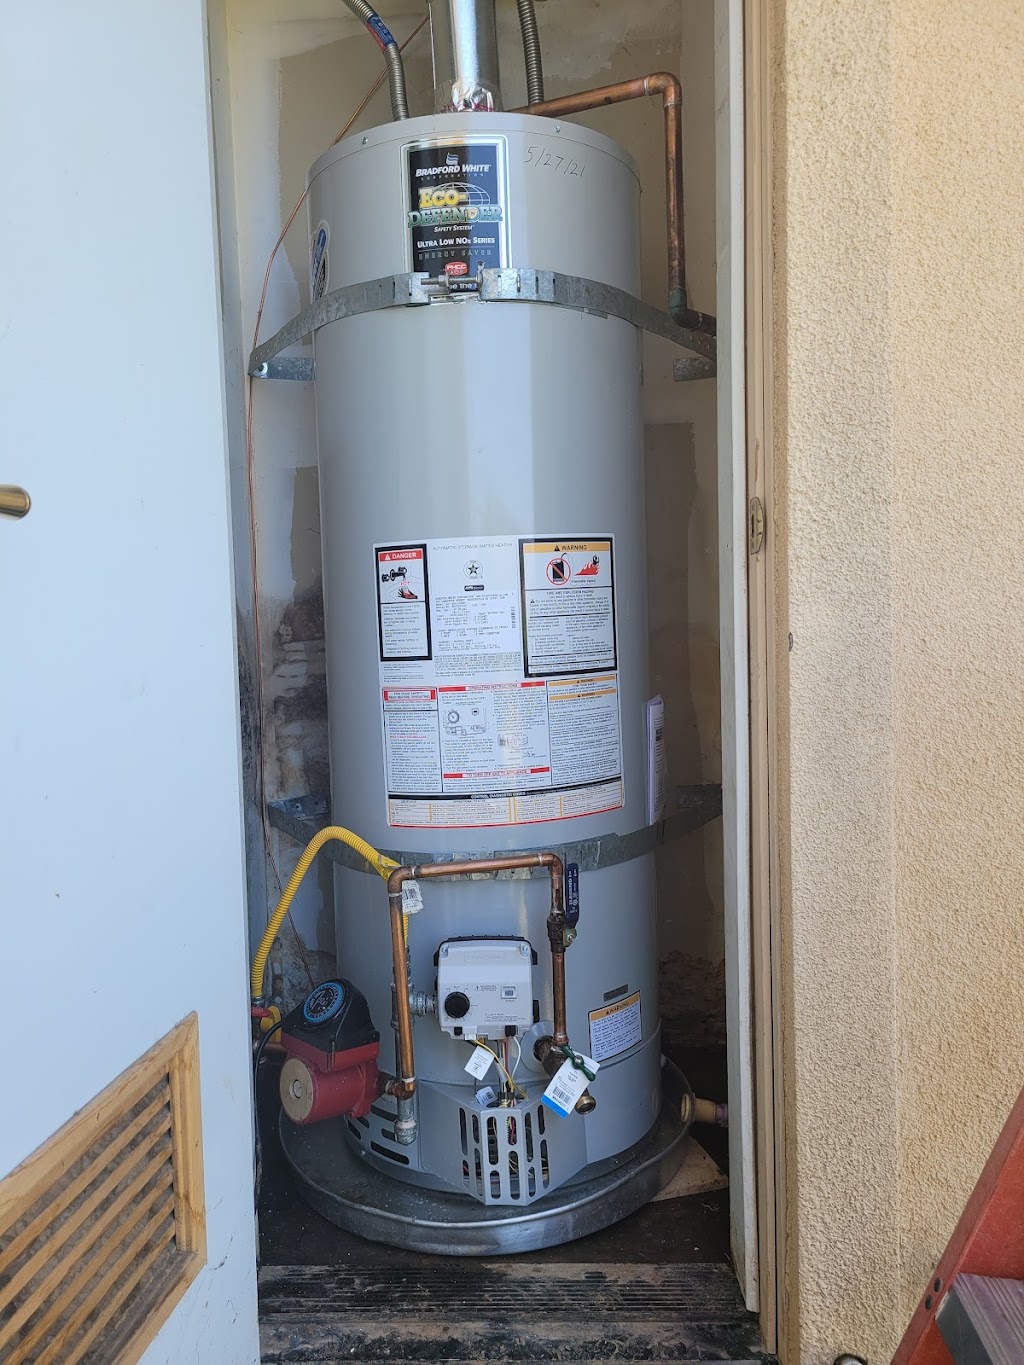 North Bay Water Heater Solutions | 232 Collier Blvd, Napa, CA 94558 | Phone: (707) 968-1369